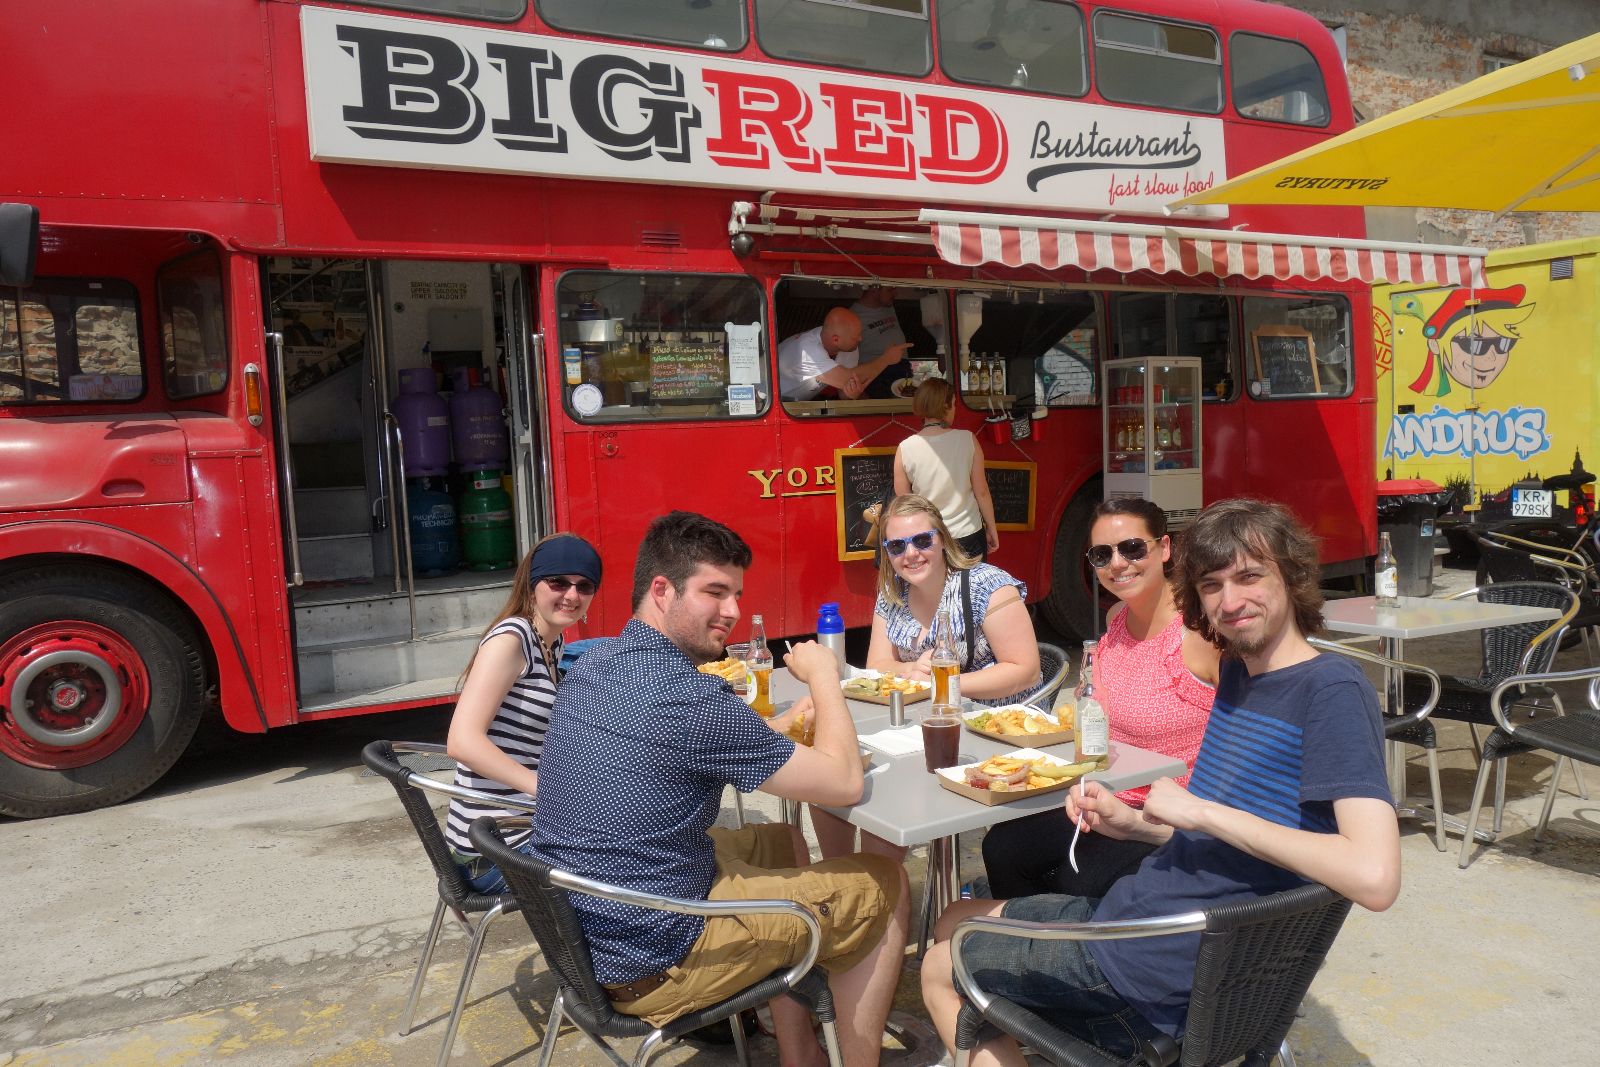 People sitting at a table eating in front of a food truck